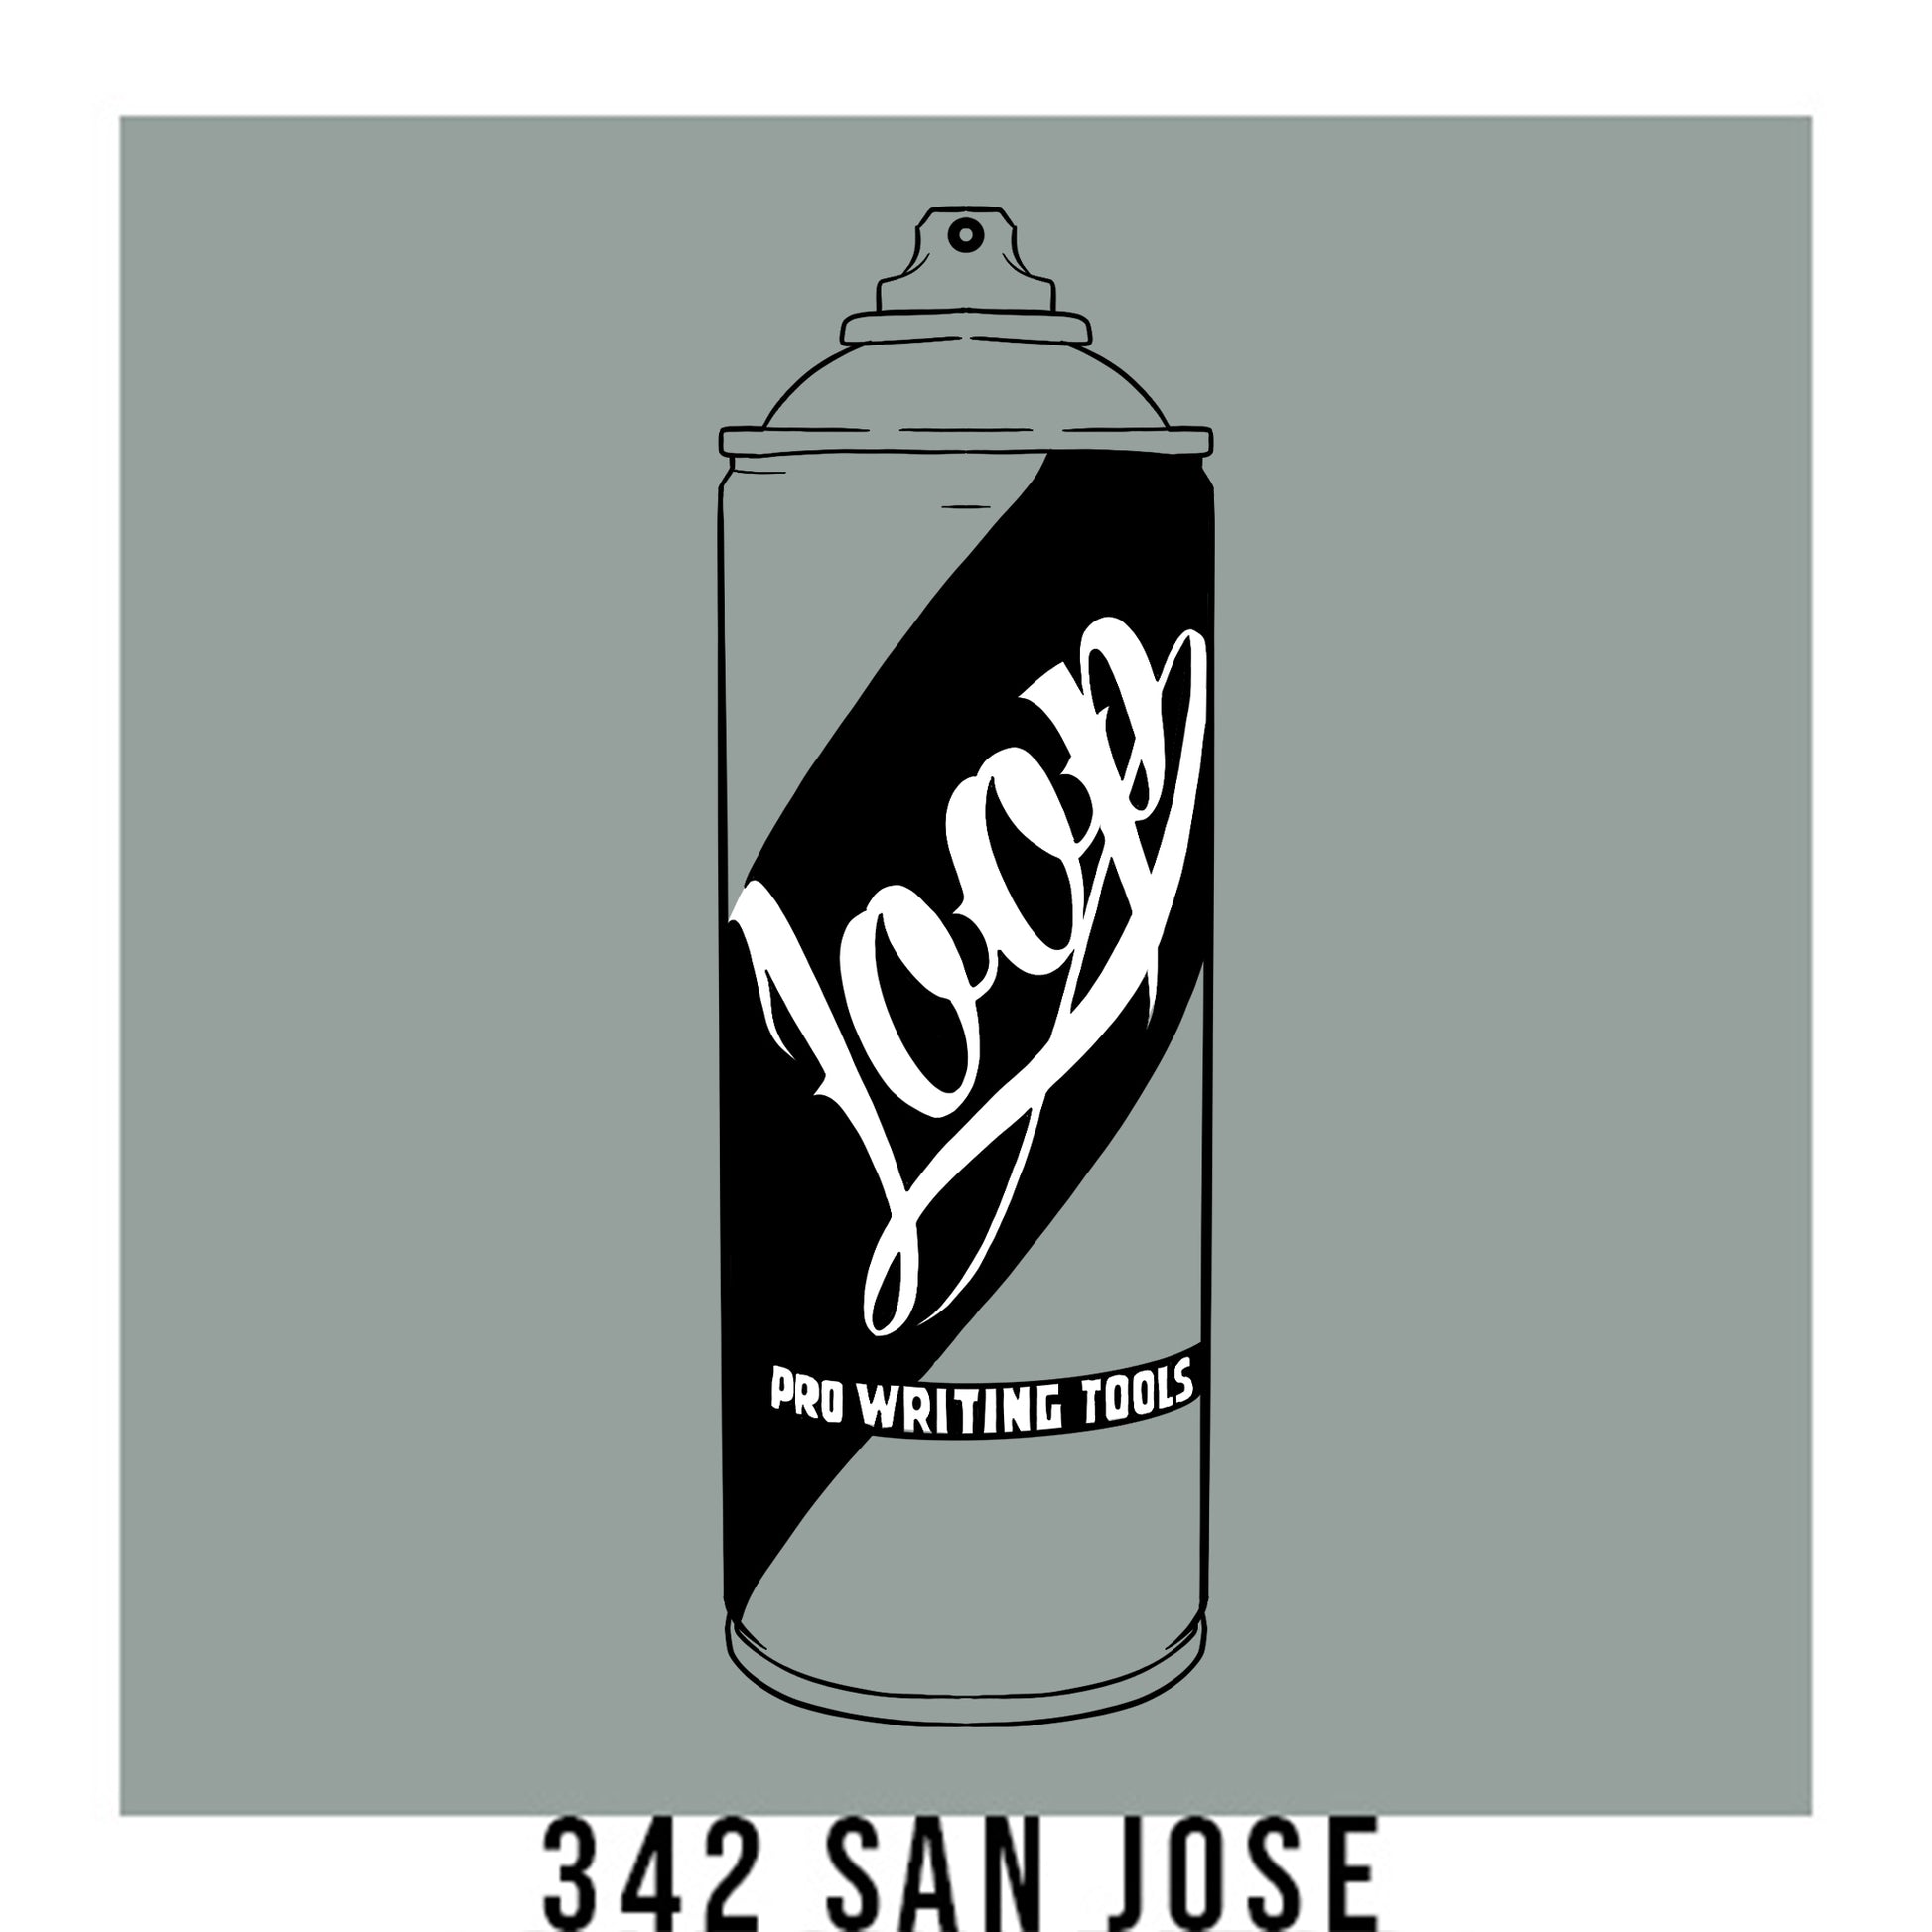 A black outline drawing of a grey spray paint can with the word "Loop" written on the face in script. The background is a color swatch of the same grey with a white border with the words "342 San Jose" at the bottom.